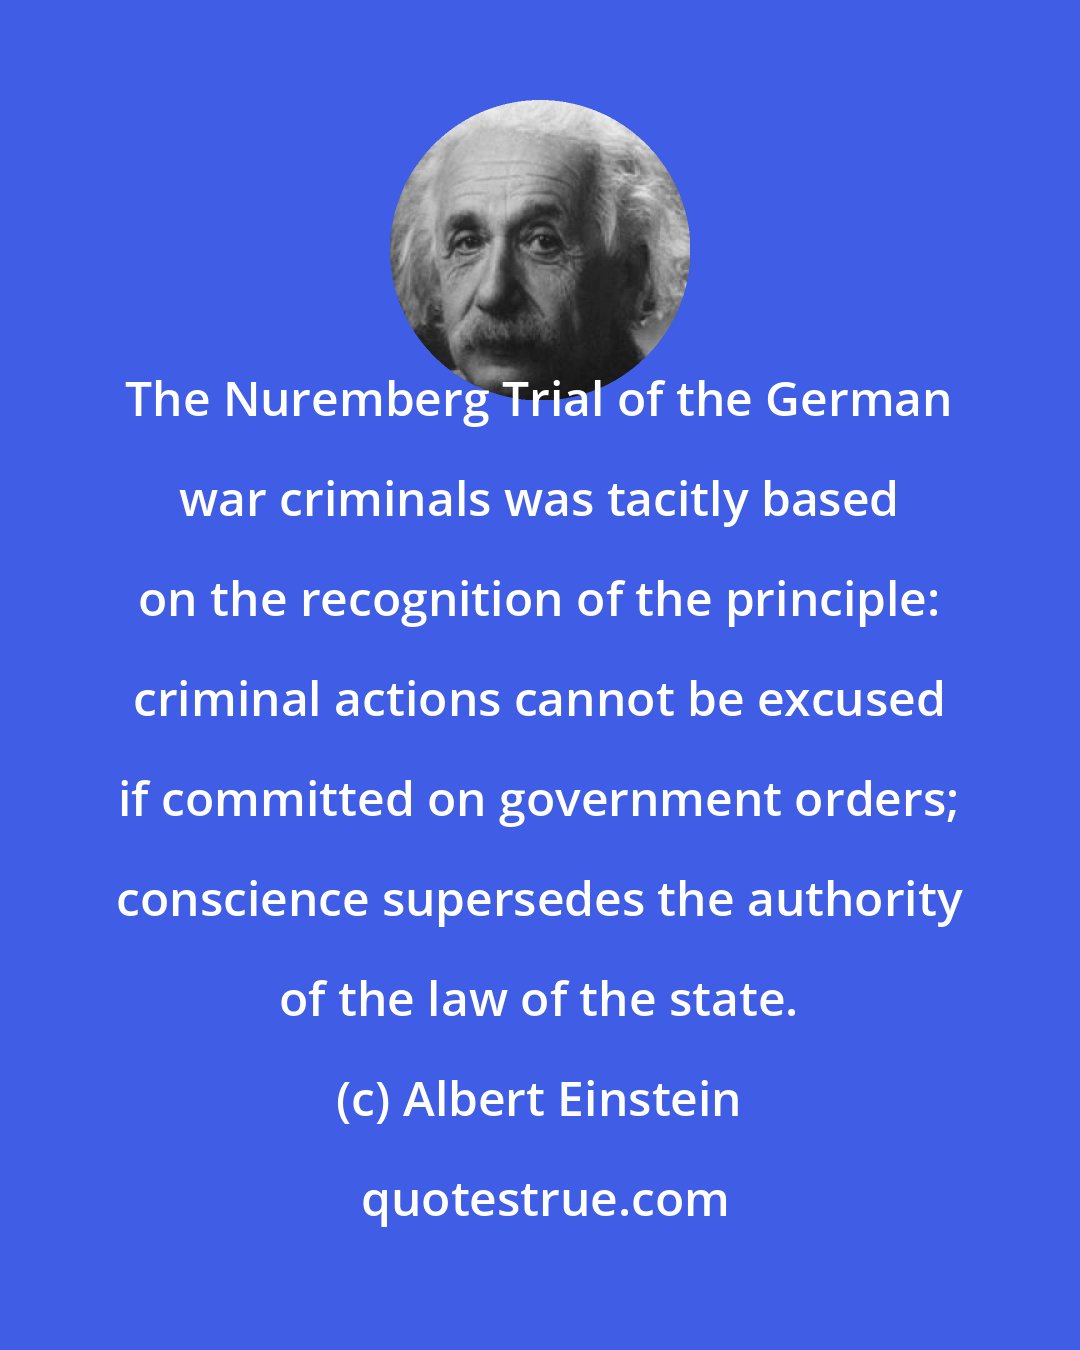 Albert Einstein: The Nuremberg Trial of the German war criminals was tacitly based on the recognition of the principle: criminal actions cannot be excused if committed on government orders; conscience supersedes the authority of the law of the state.